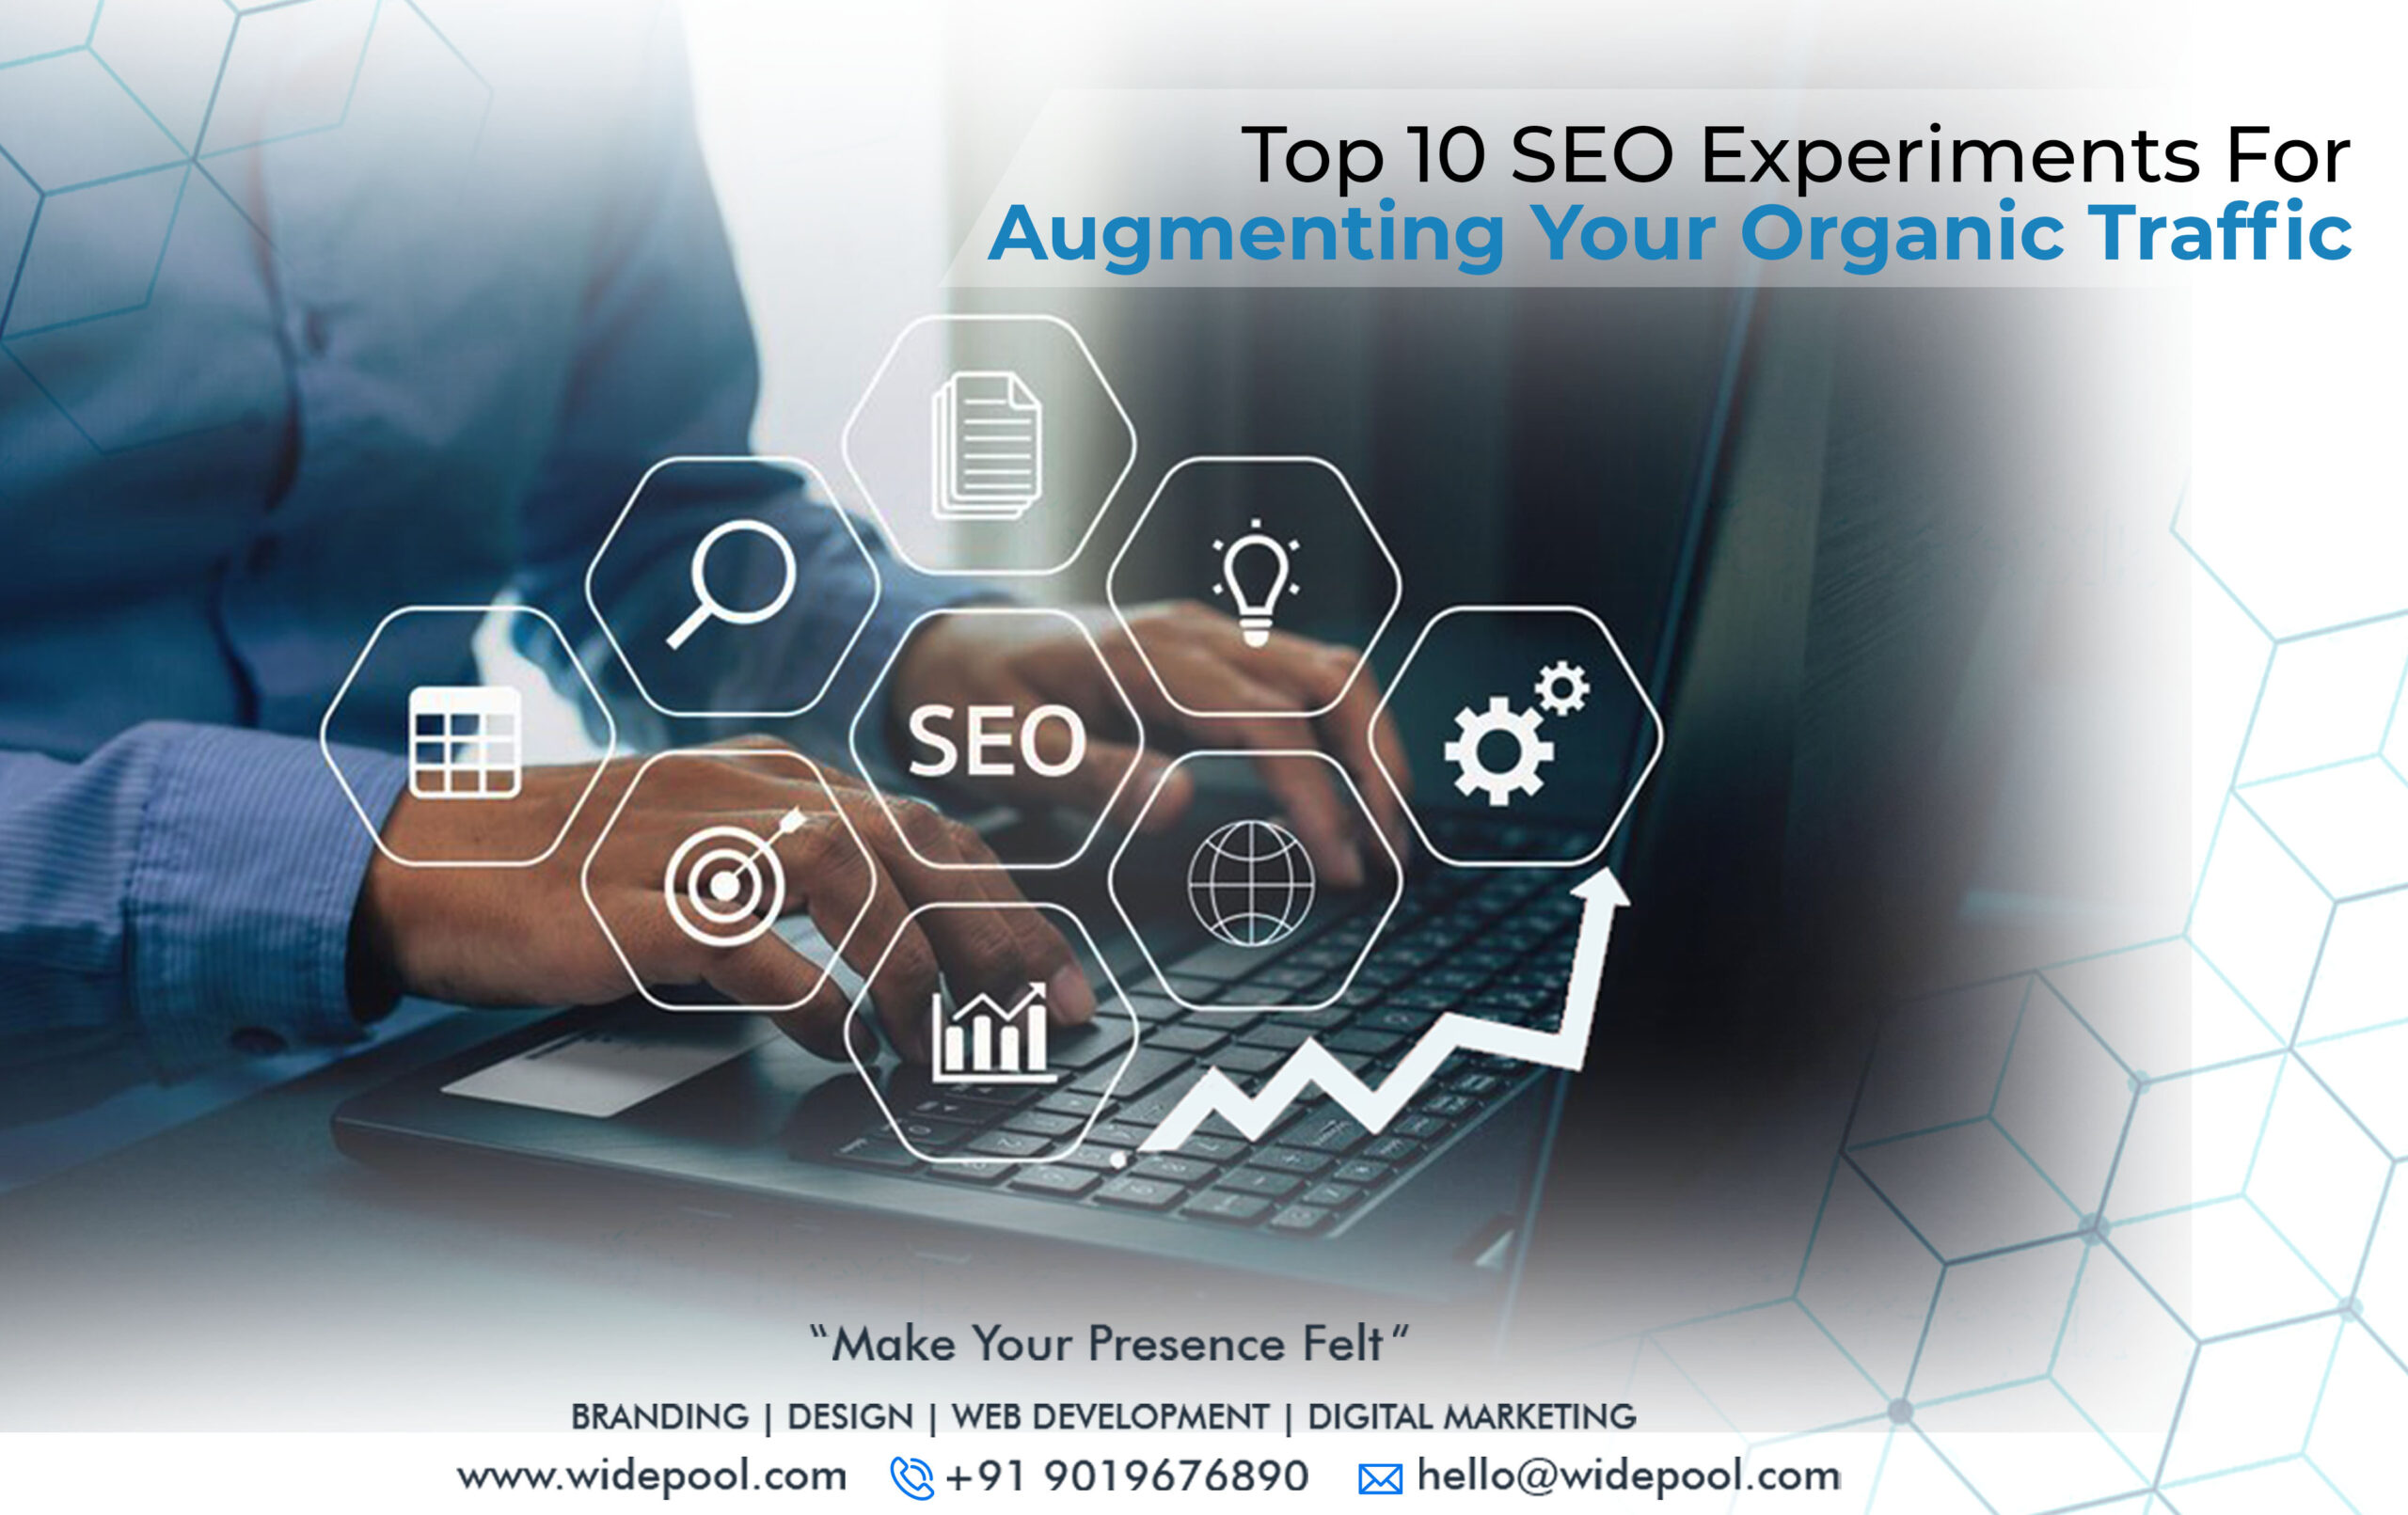 Top 10 SEO Experiments for Augmenting Your Organic Traffic